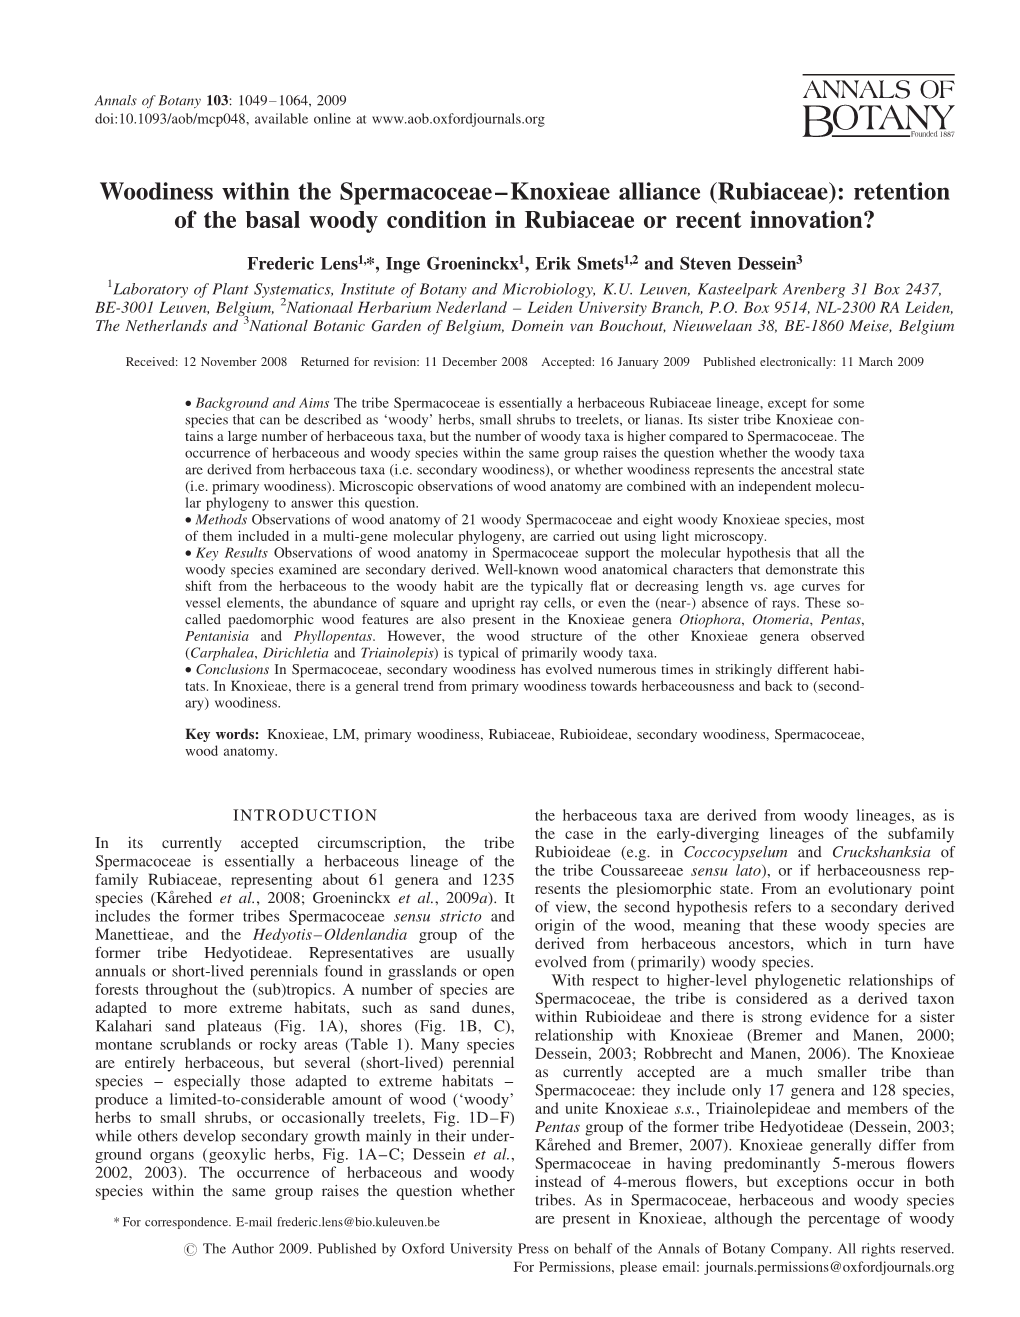 Woodiness Within the Spermacoceae–Knoxieae Alliance (Rubiaceae): Retention of the Basal Woody Condition in Rubiaceae Or Recent Innovation?